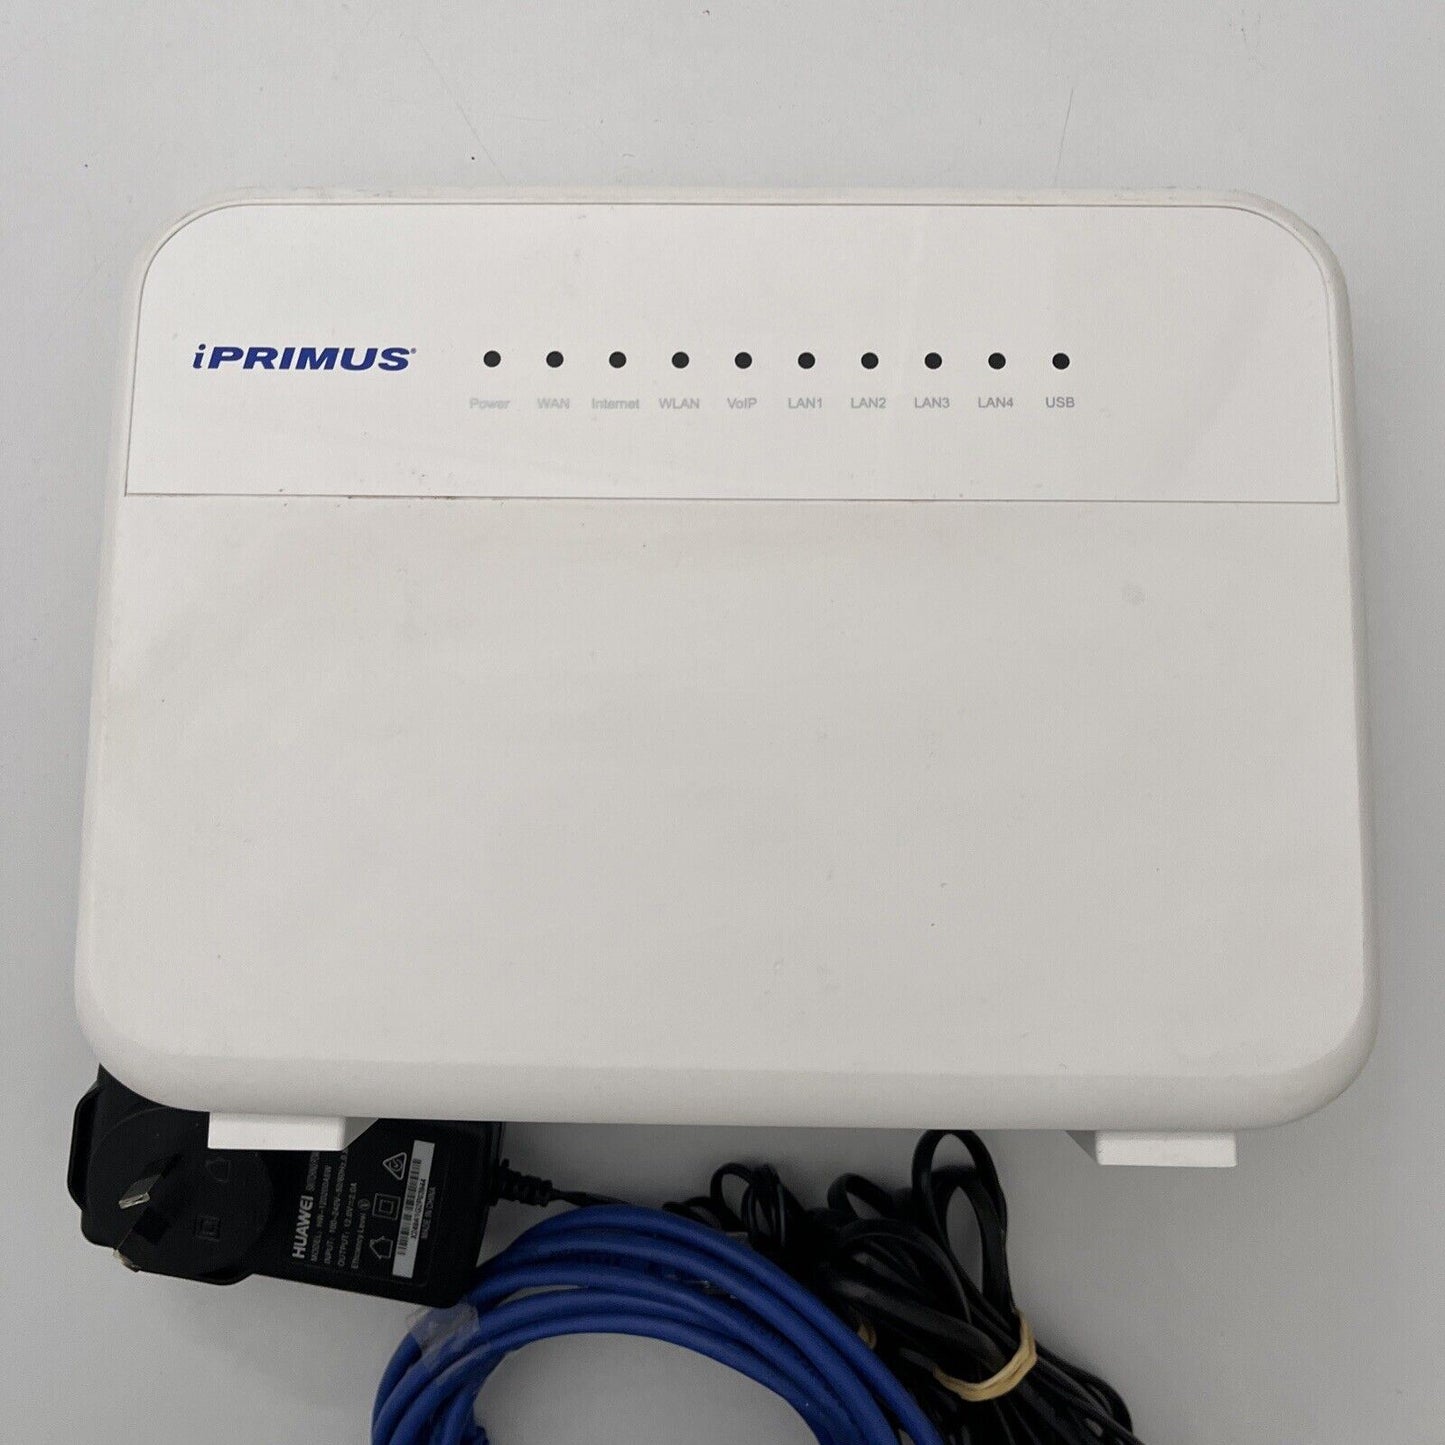 iPrimus Huawei HG659 Wireless VoIP ADSL 2+ NBN Compatible Wireless Modem Router